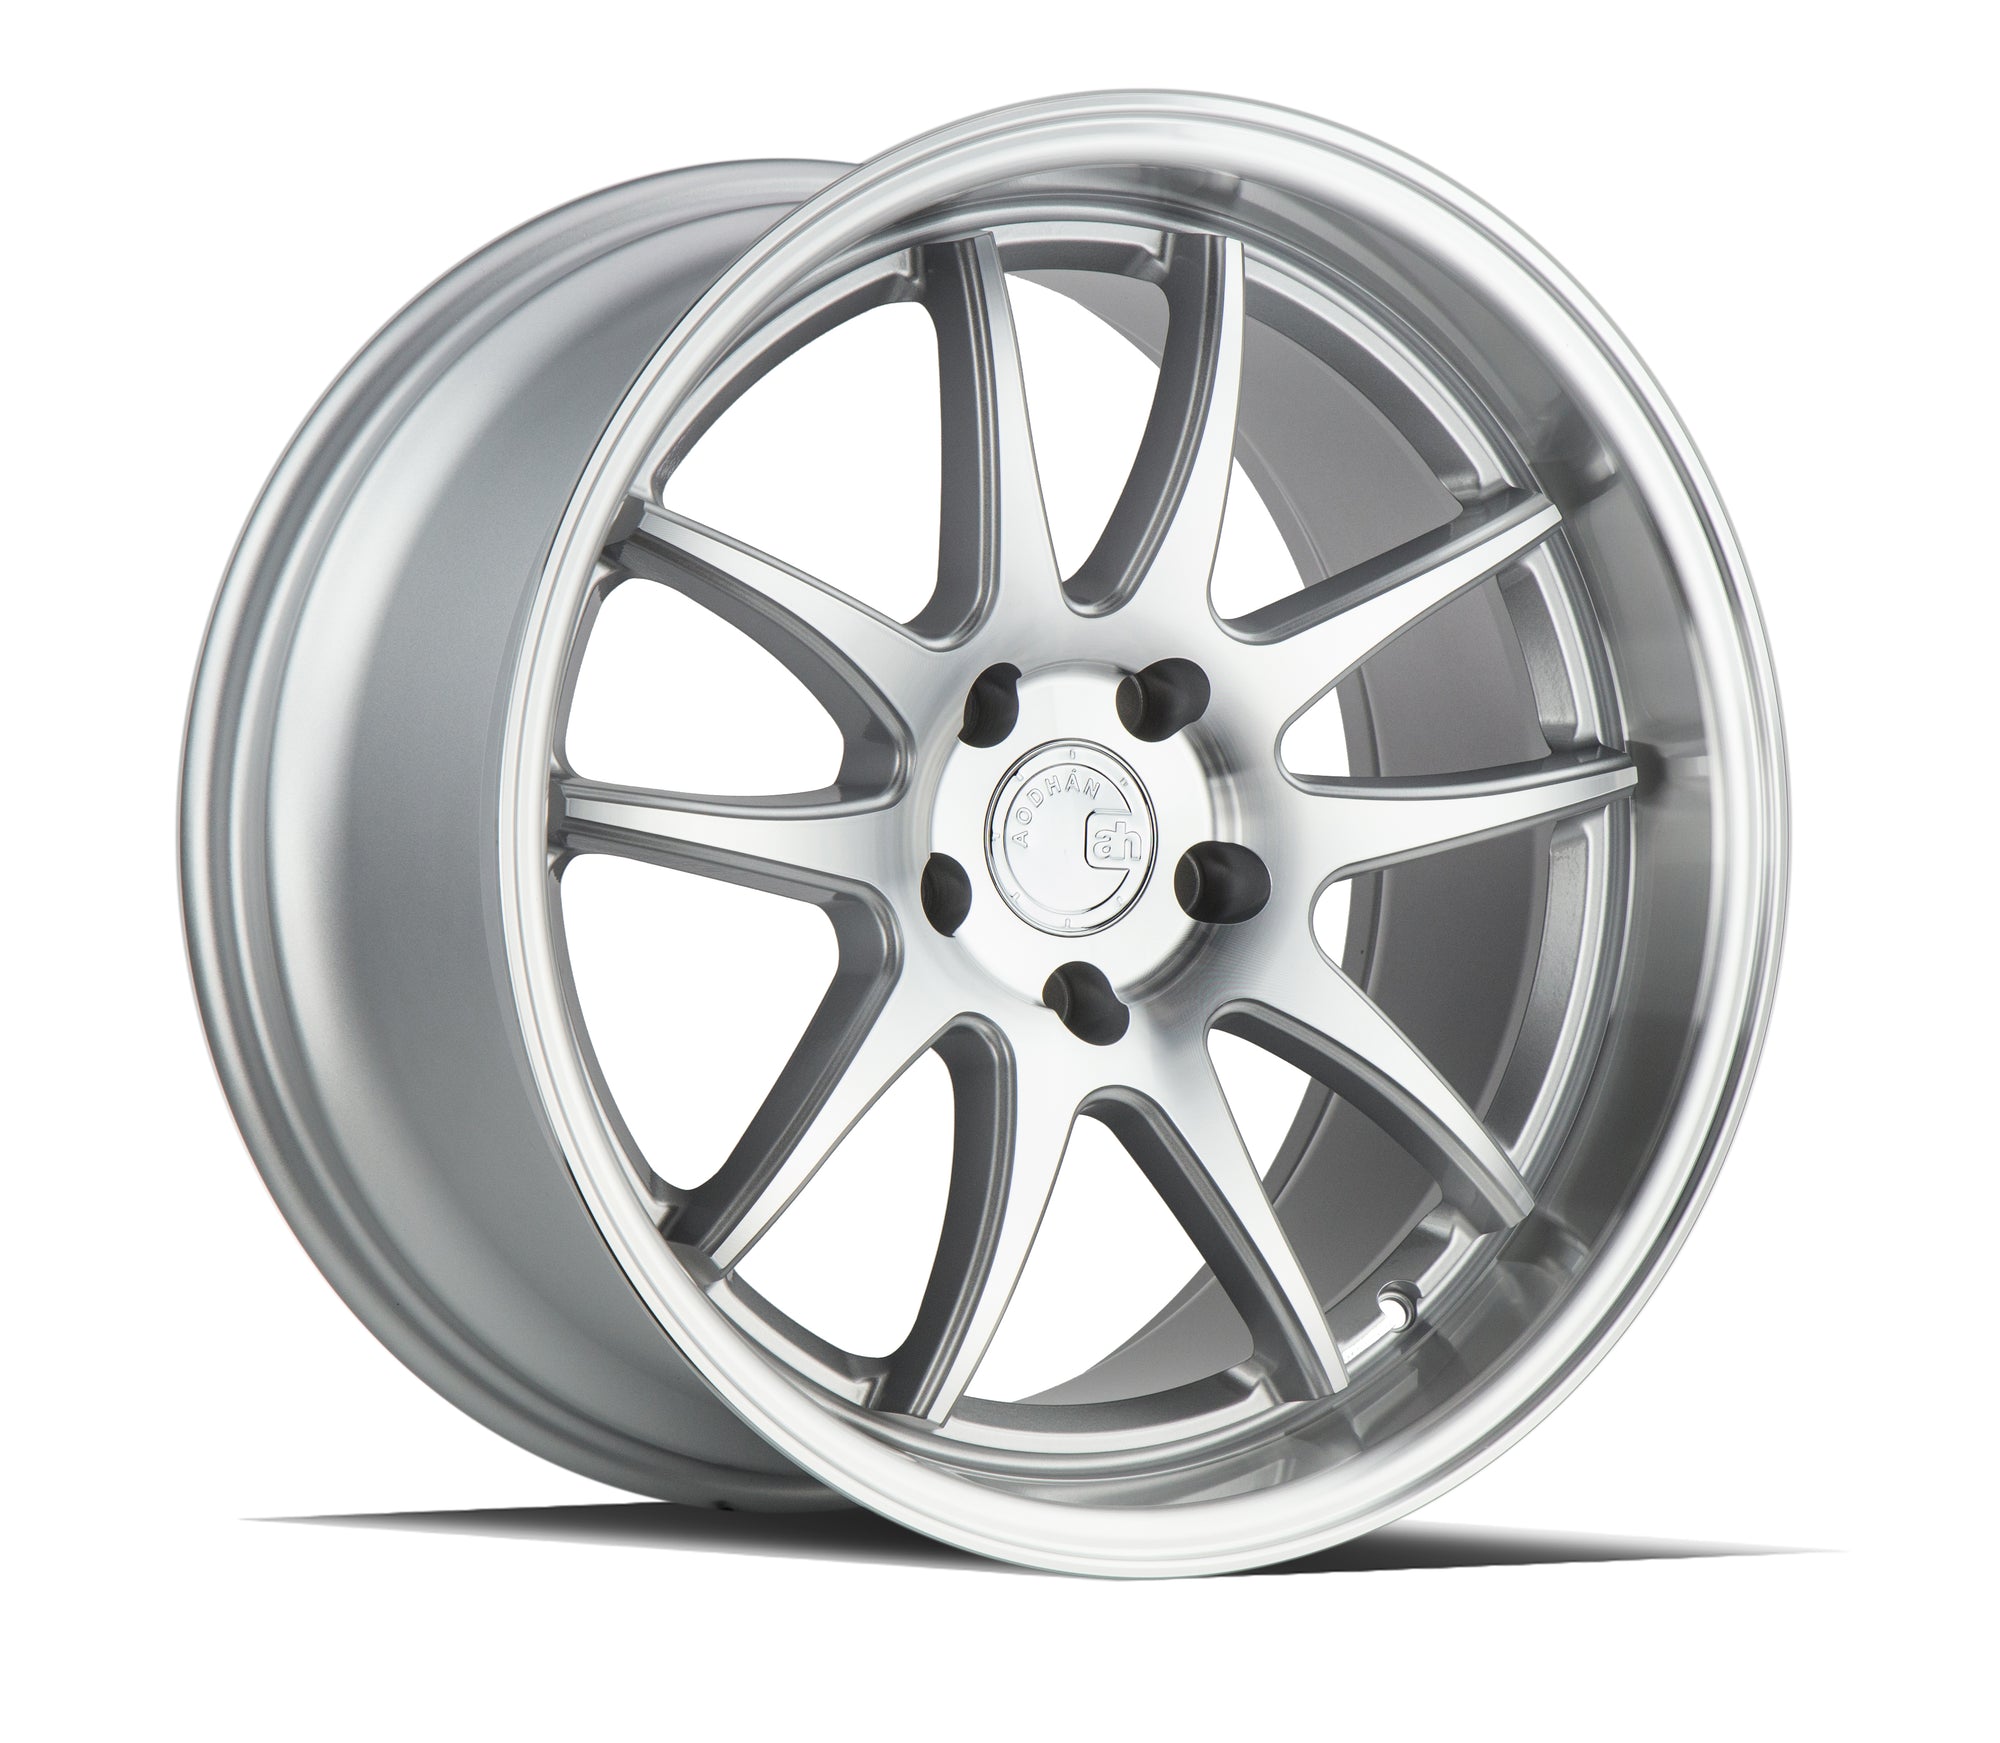 Aodhan DS02 18x9.5 5X100 +35 Silver w/Machined Face